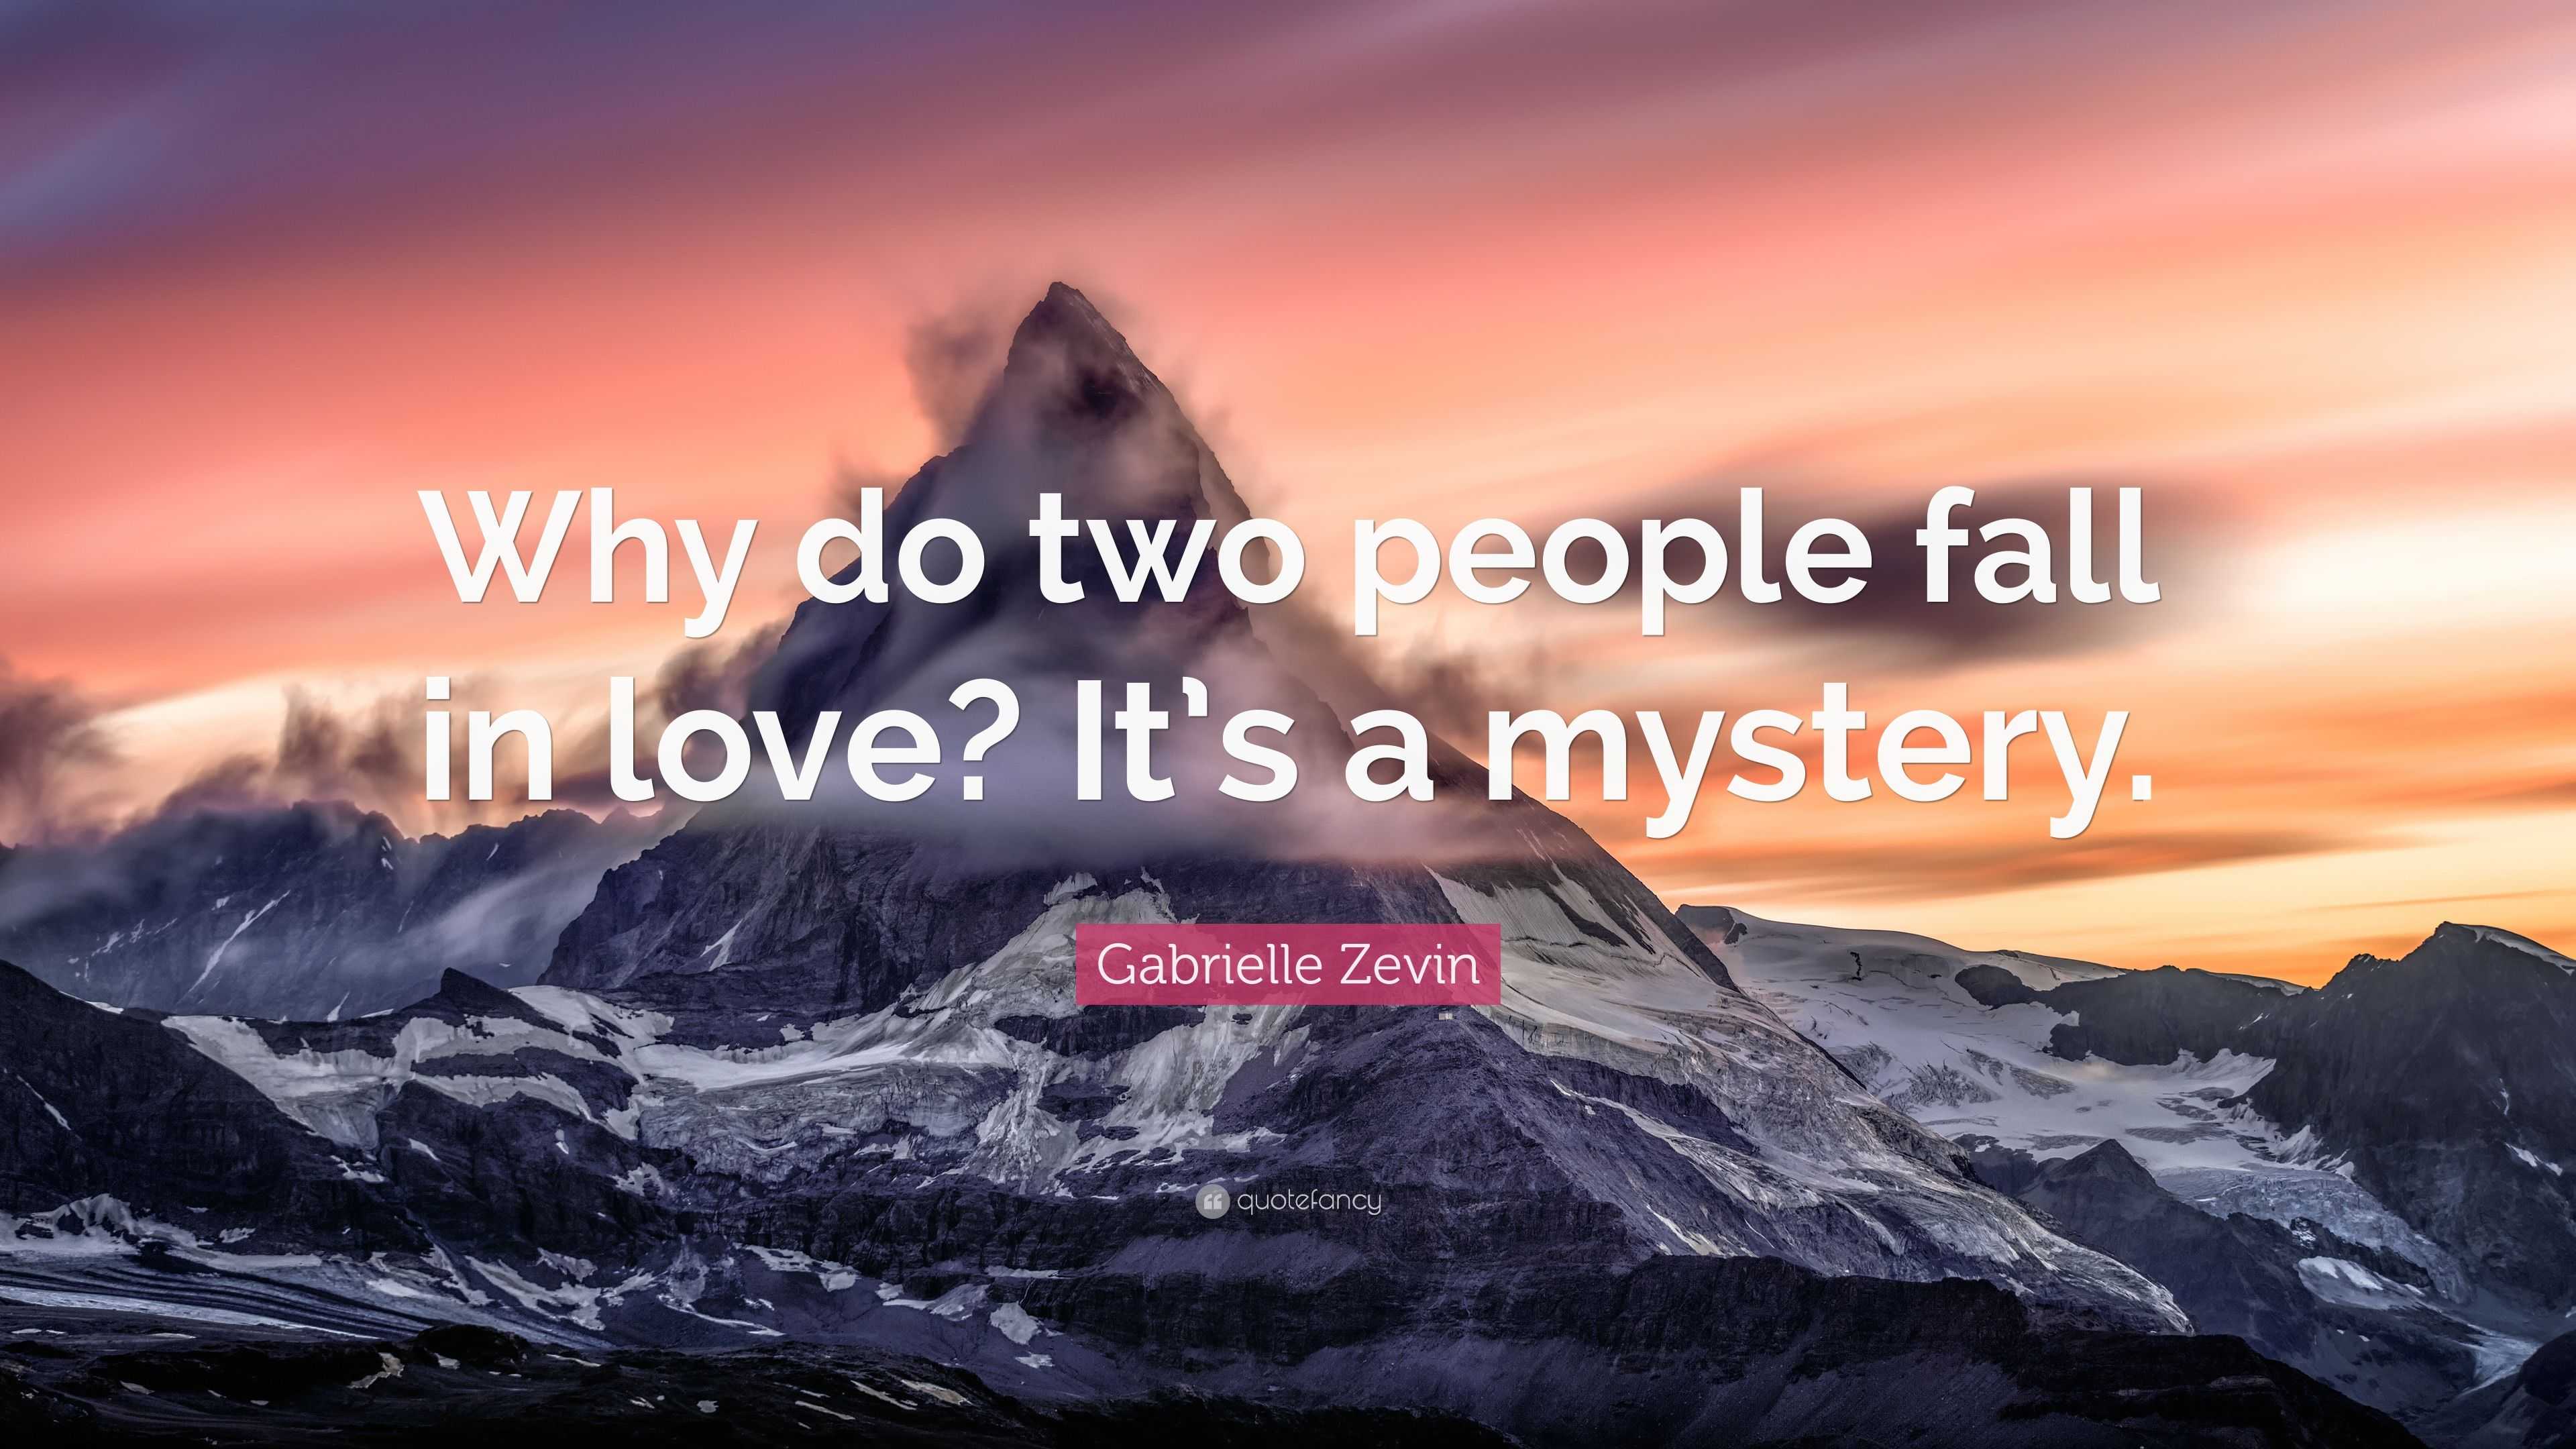 Gabrielle Zevin Quote “Why do two people fall in love It s a mystery